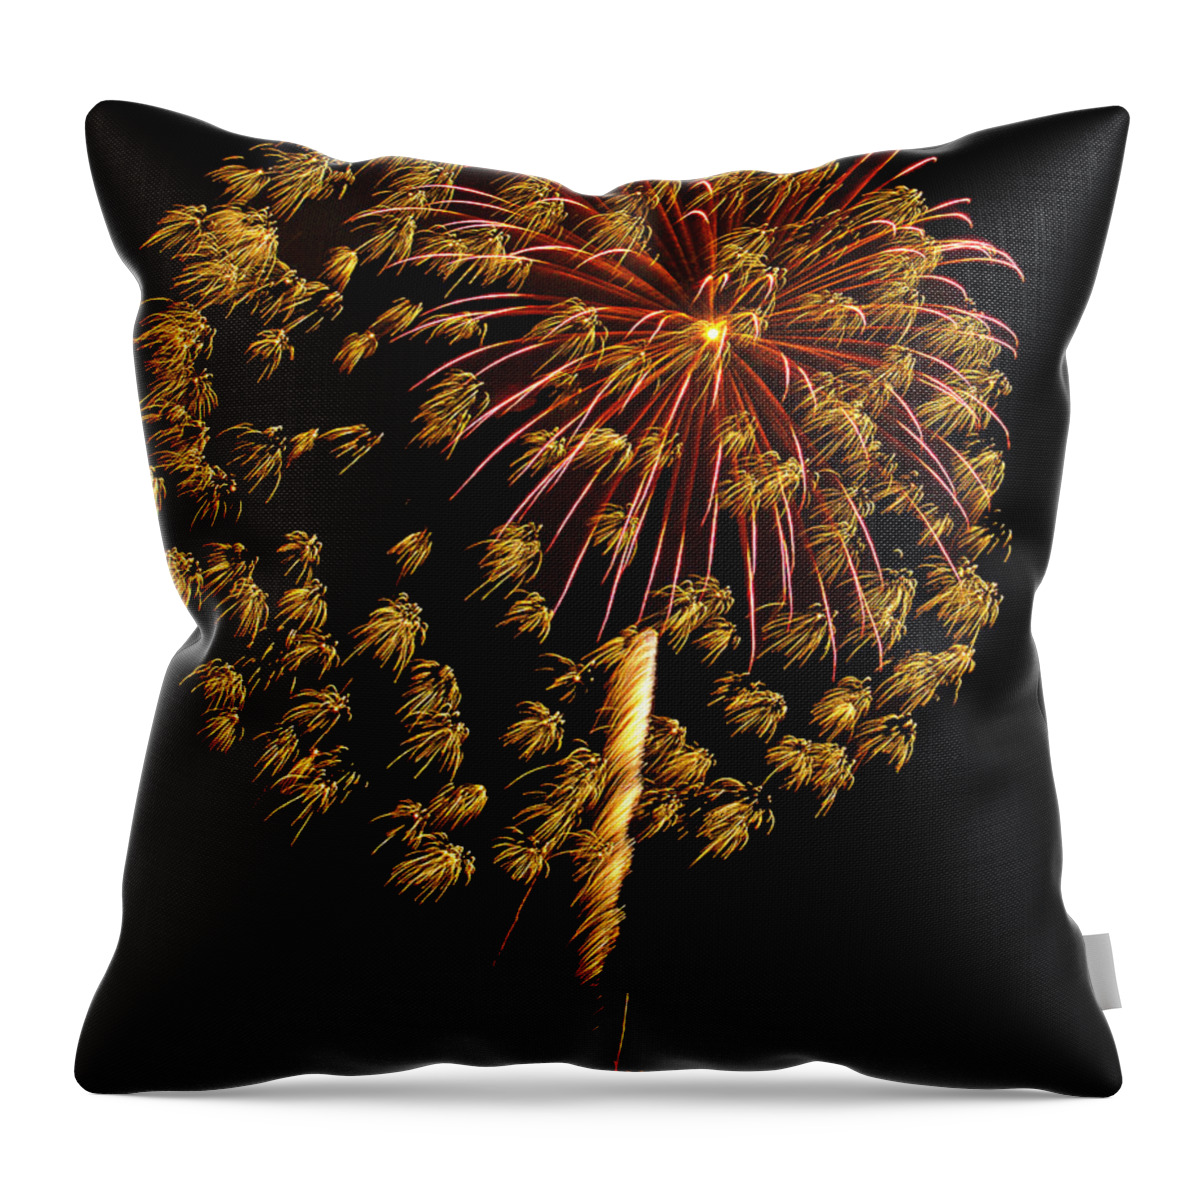 Firework Throw Pillow featuring the photograph Fireworks 10 by Bill Barber